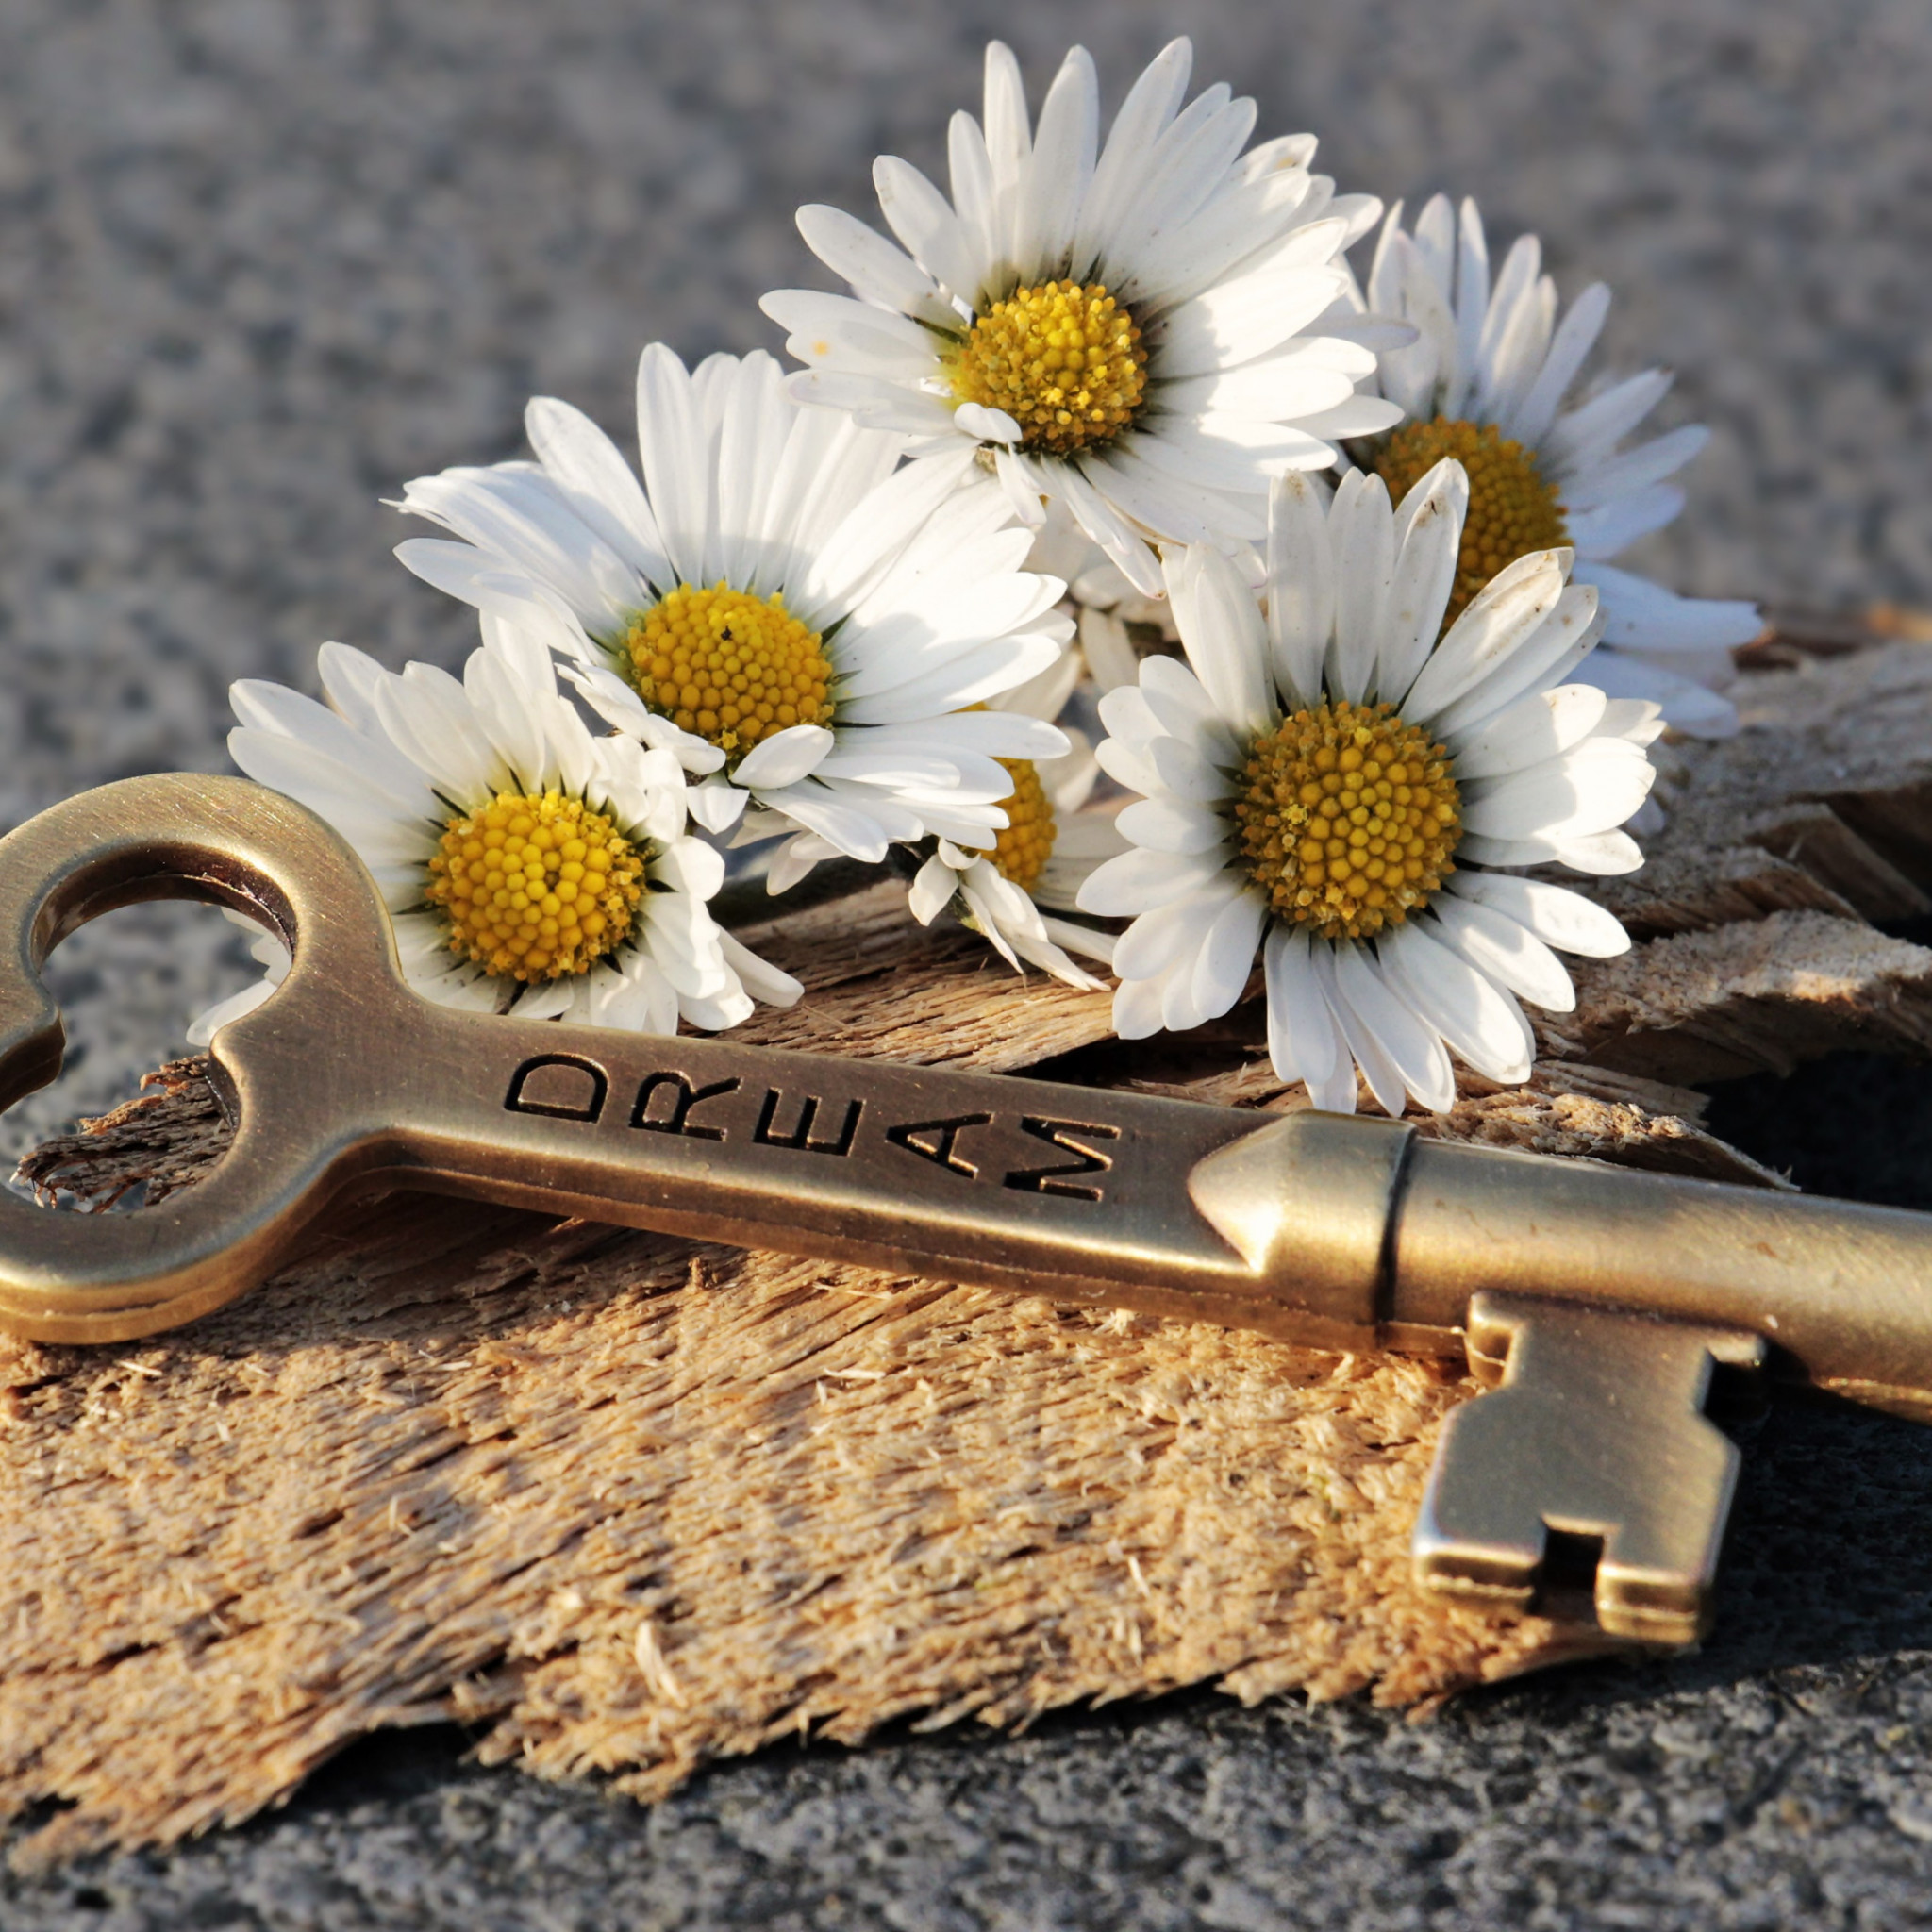 The dreams key and daisy flowers wallpaper 2048x2048